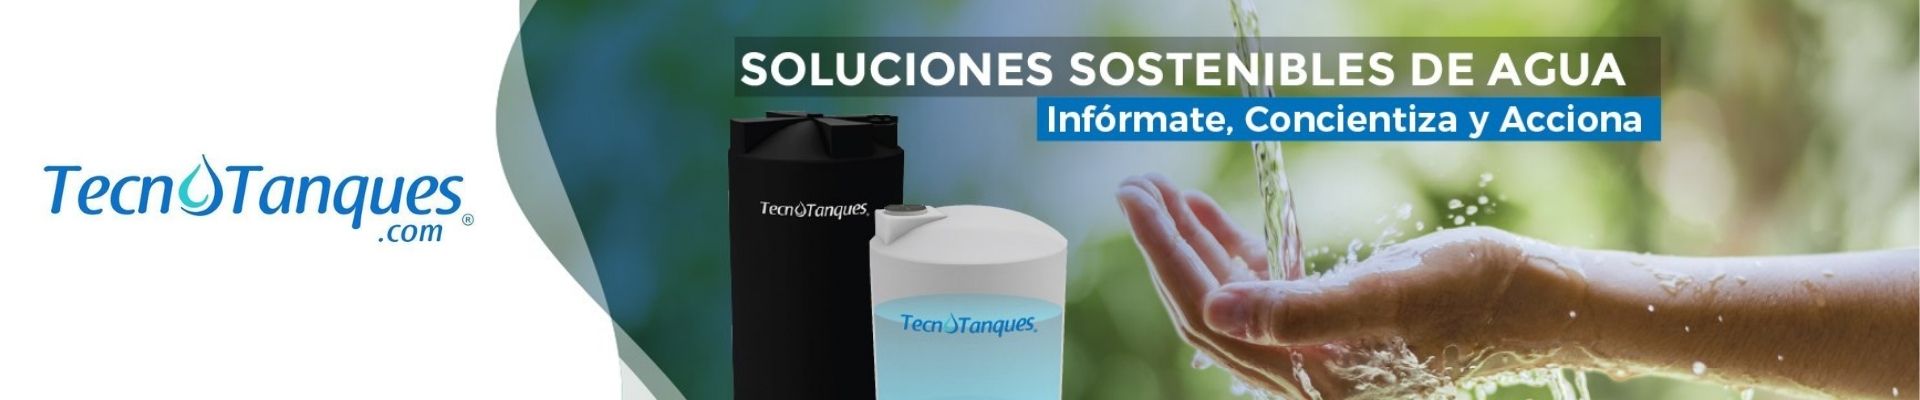 Tecnotanques-agroshow